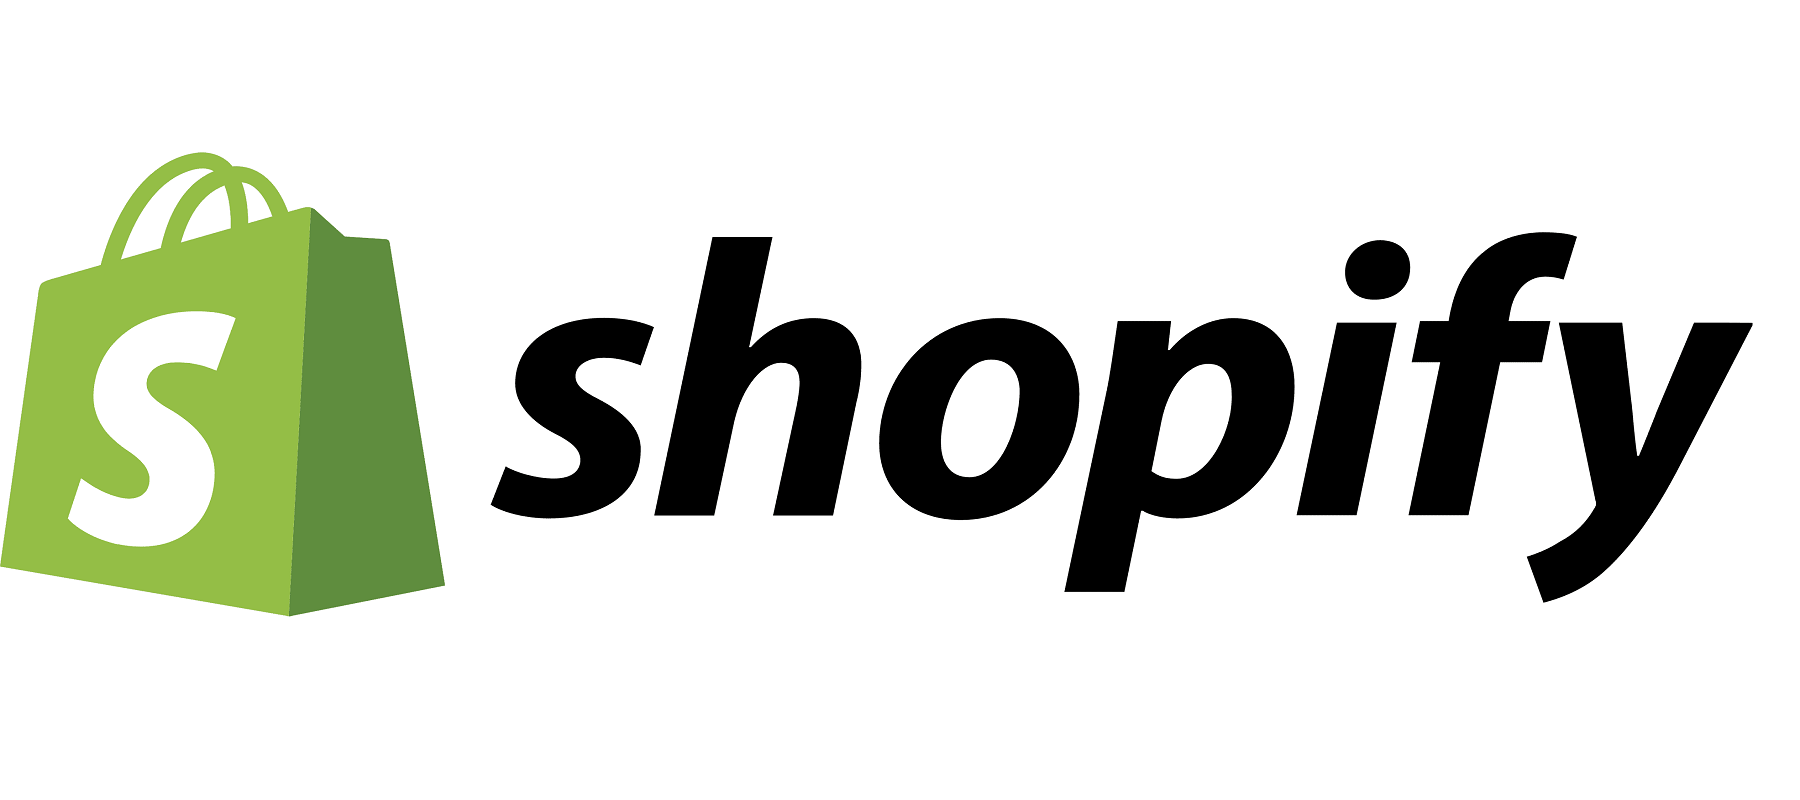 Shirofune Integrates with Shopify to optimize campaigns based on customer lifetime value